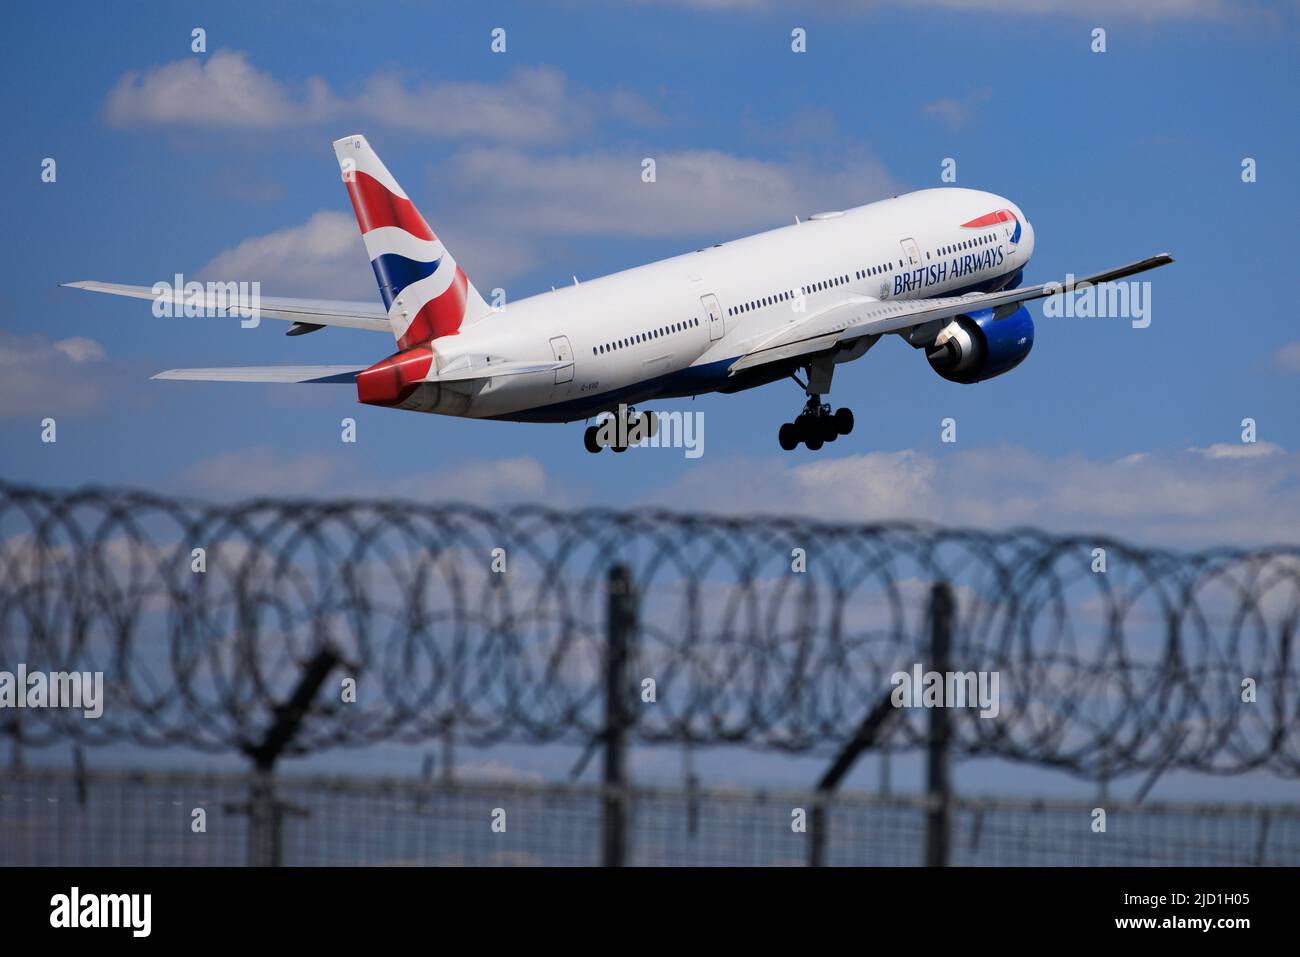 Security fence at Gatwick Airport as a British Airways plane takes off on the runway Stock Photo